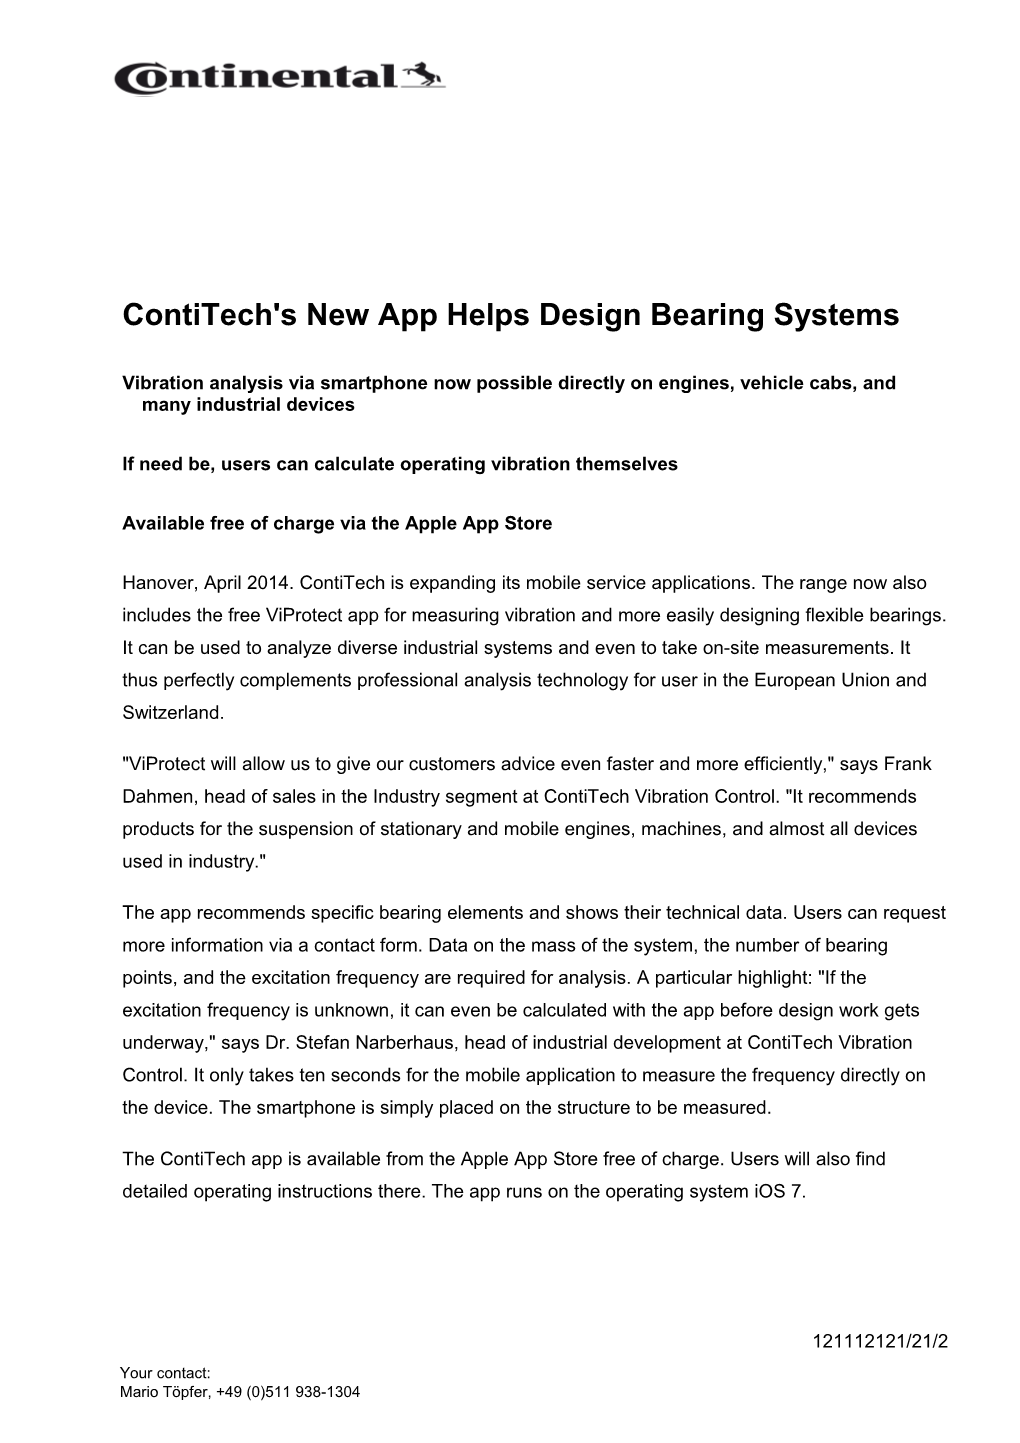 Contitech's New App Helps Design Bearing Systems